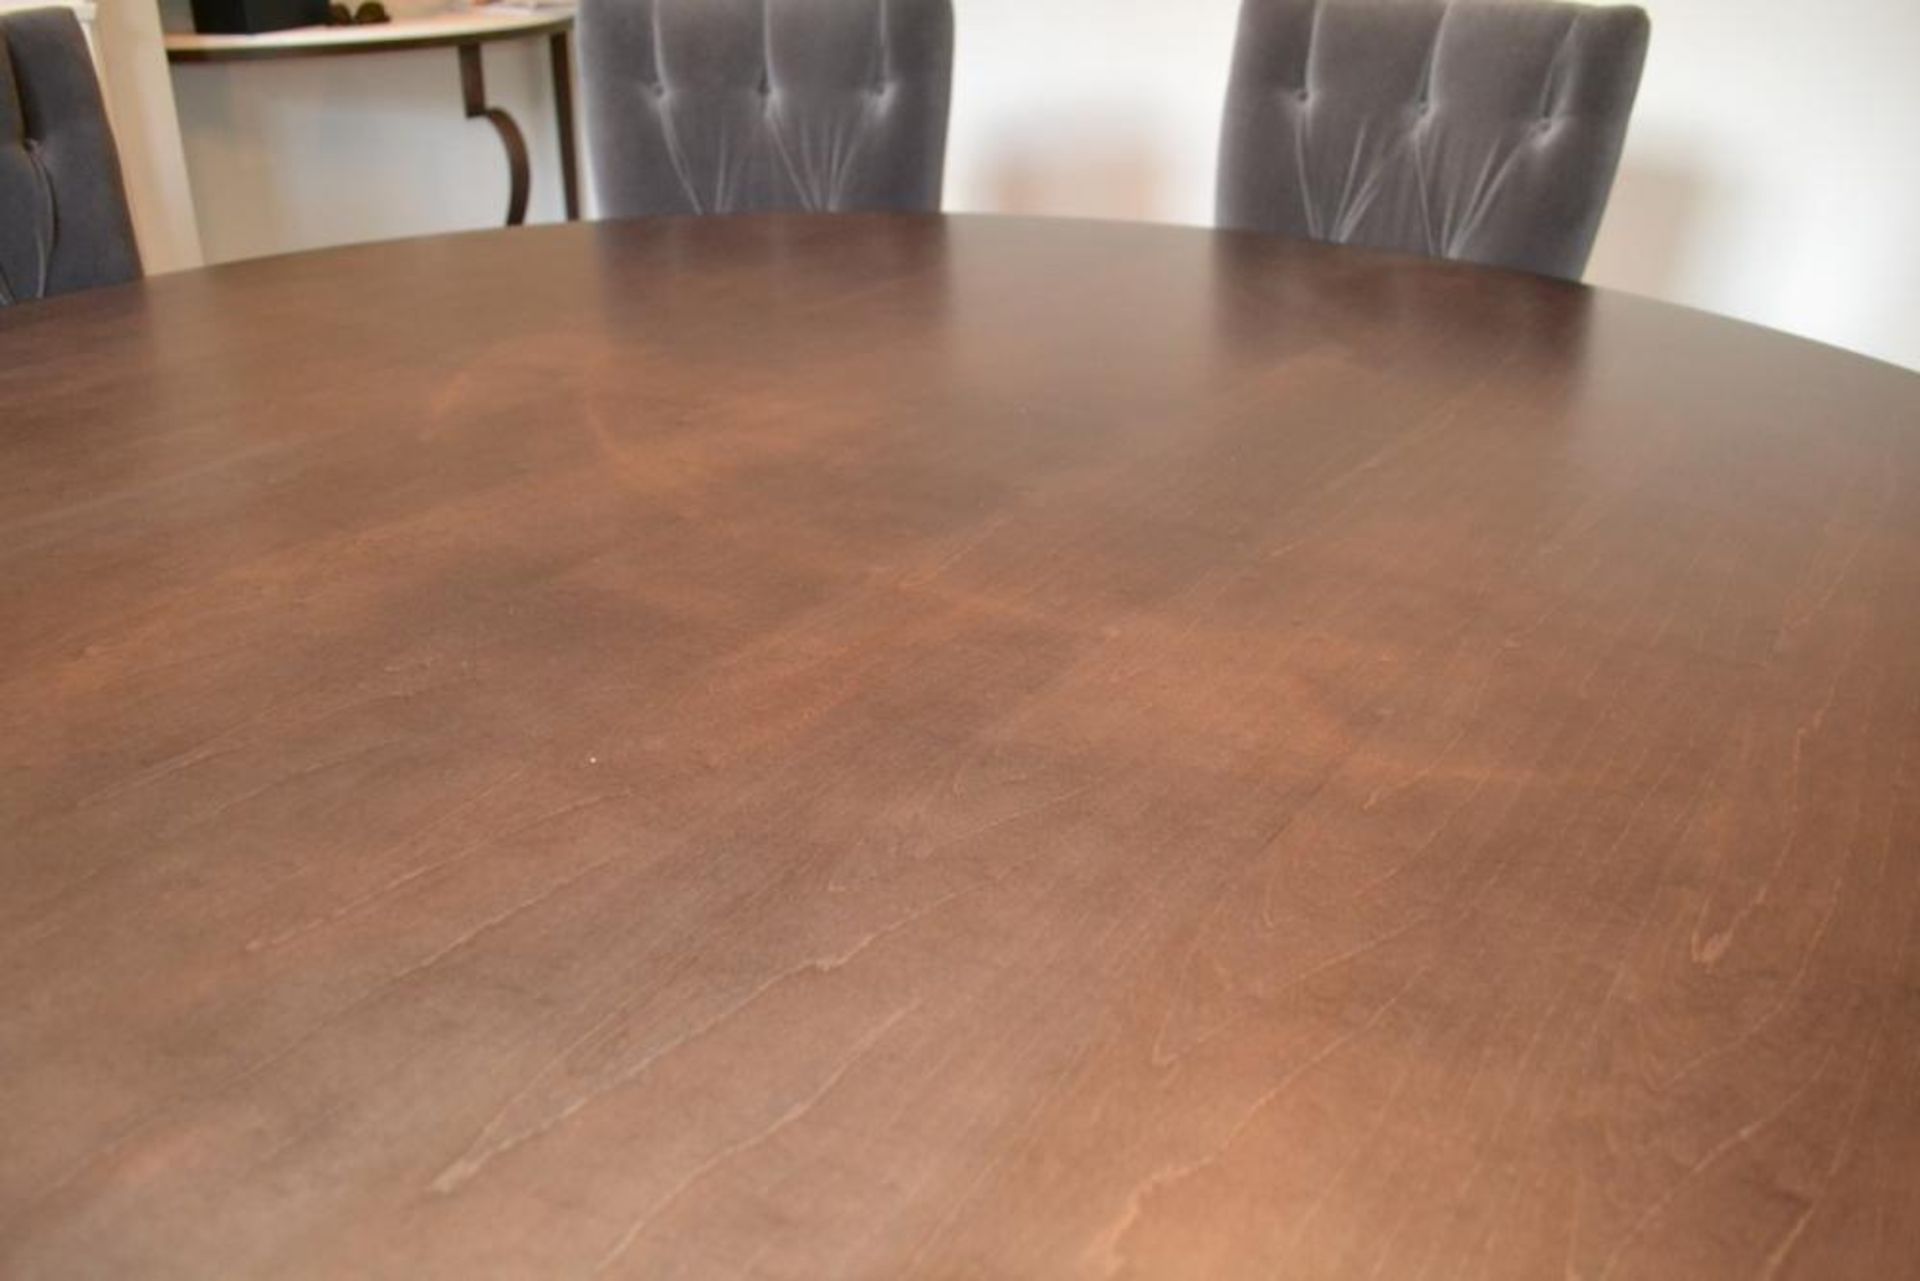 1 x Bespoke Round Dining Table With Sycamore Wood Finish - Includes Set of Six Grey Button Back - Image 6 of 20